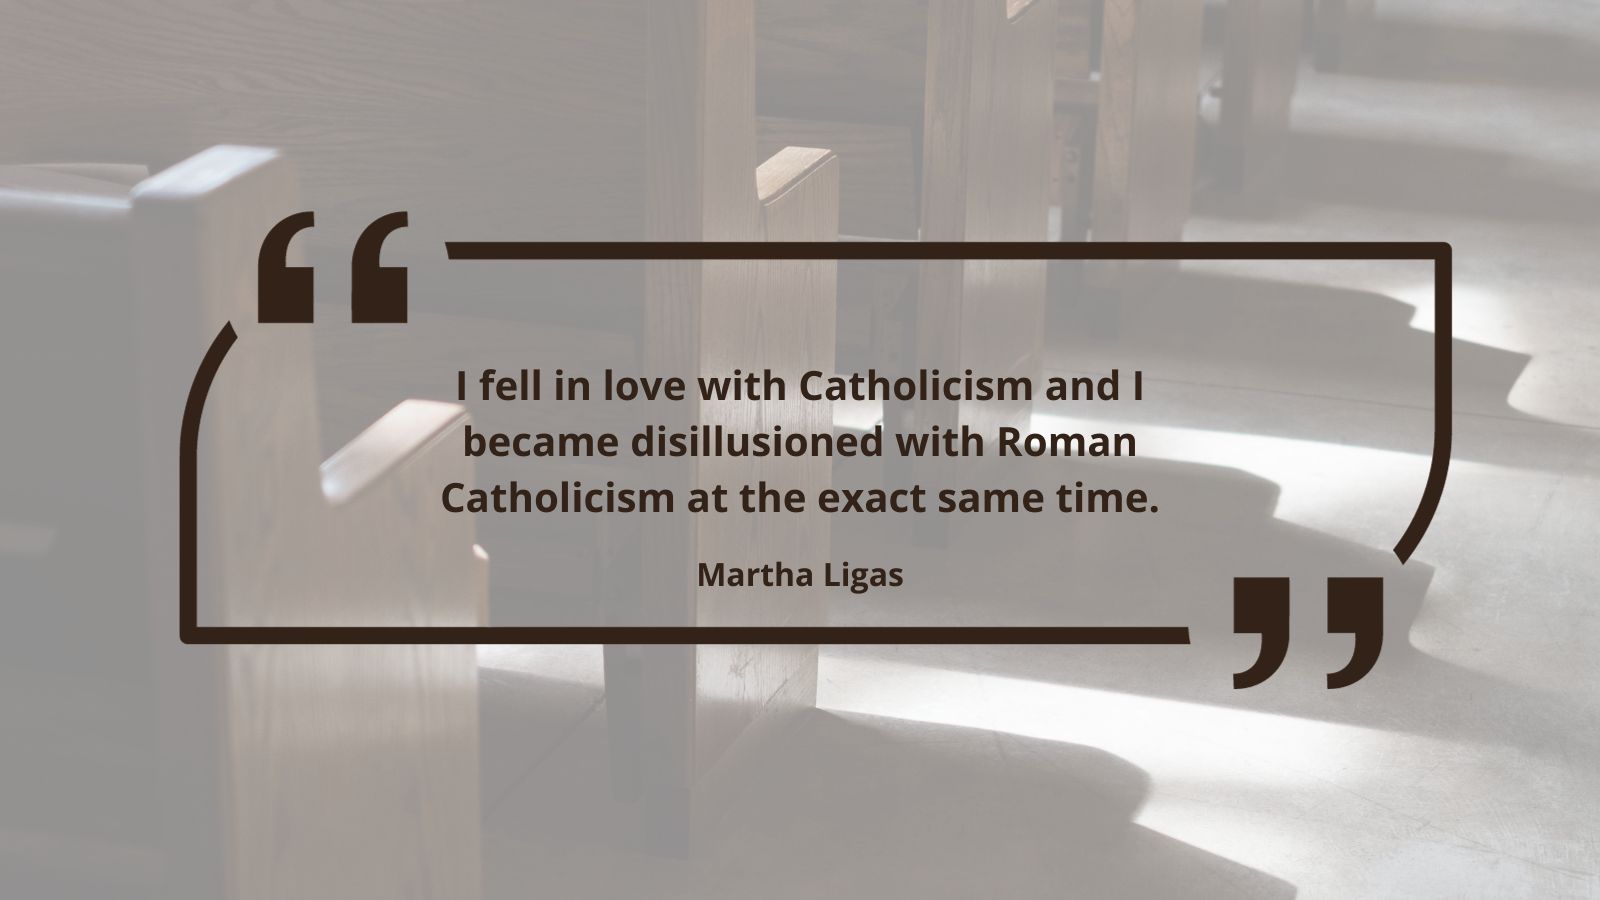 "I fell in love with Catholicism and I became disillusioned with Roman Catholicism at the exact same time." (NCR graphic/Toni-Ann Ortiz)